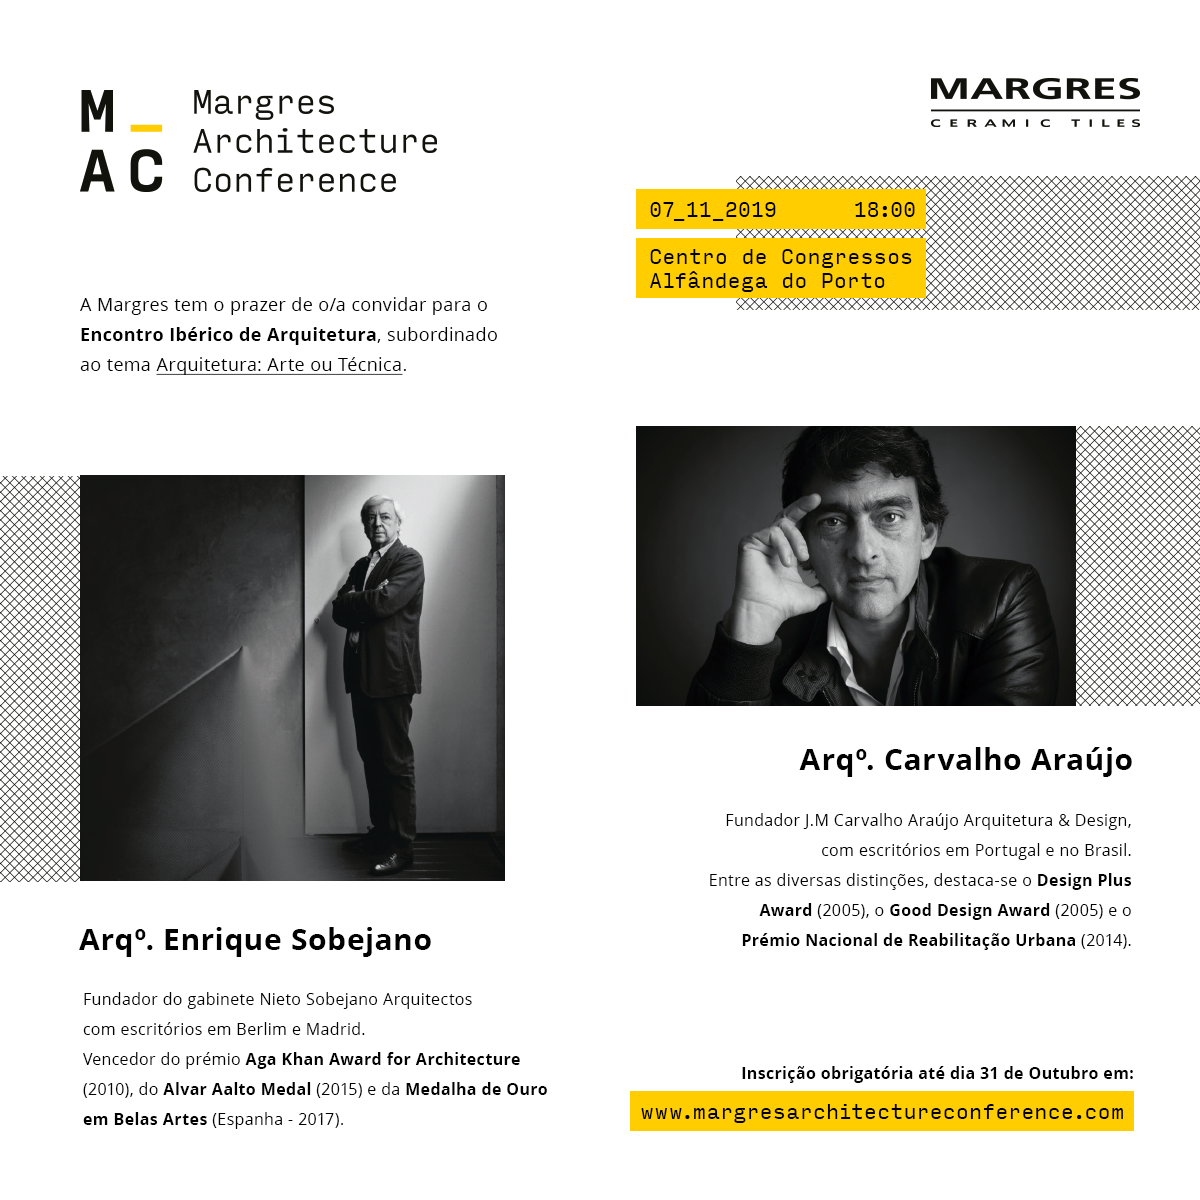 Margres Architecture Conference